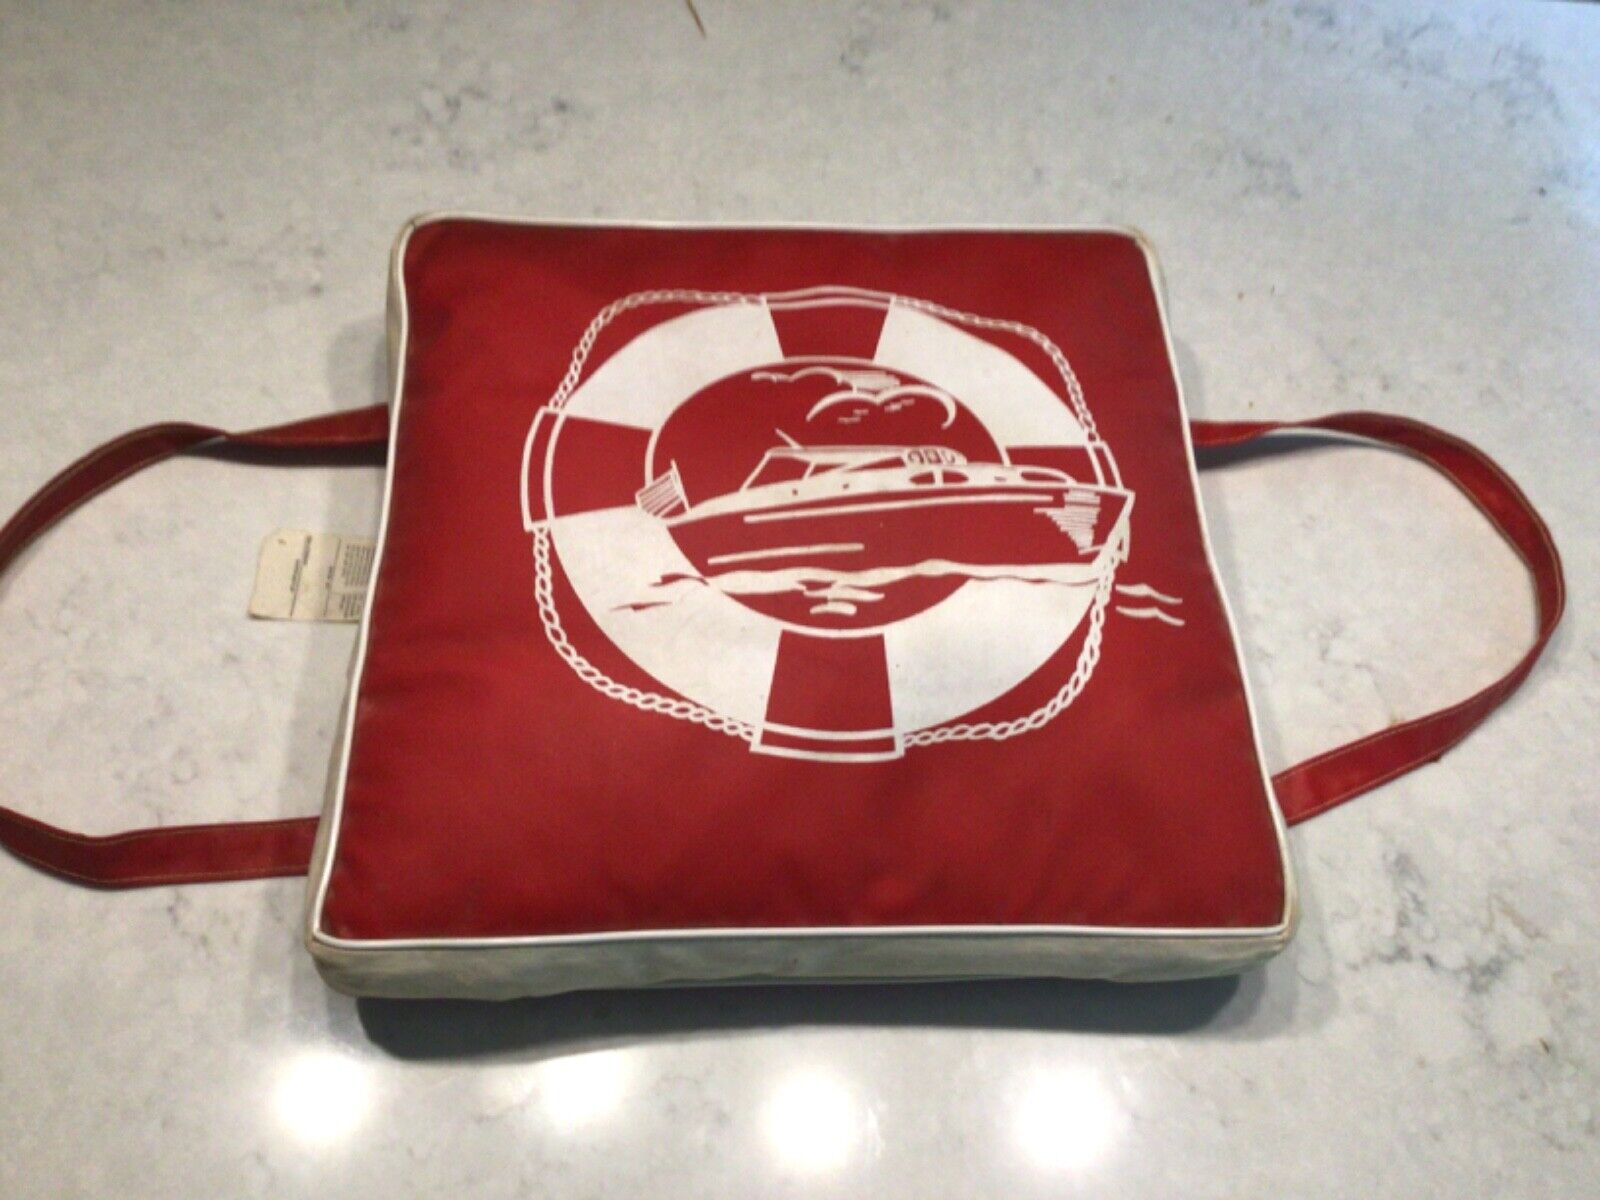 VINTAGE 50s 60s BOAT SEAT CUSHION FLOTATION DEVICE CHRIS CRAFT BOAT GRAPHIC